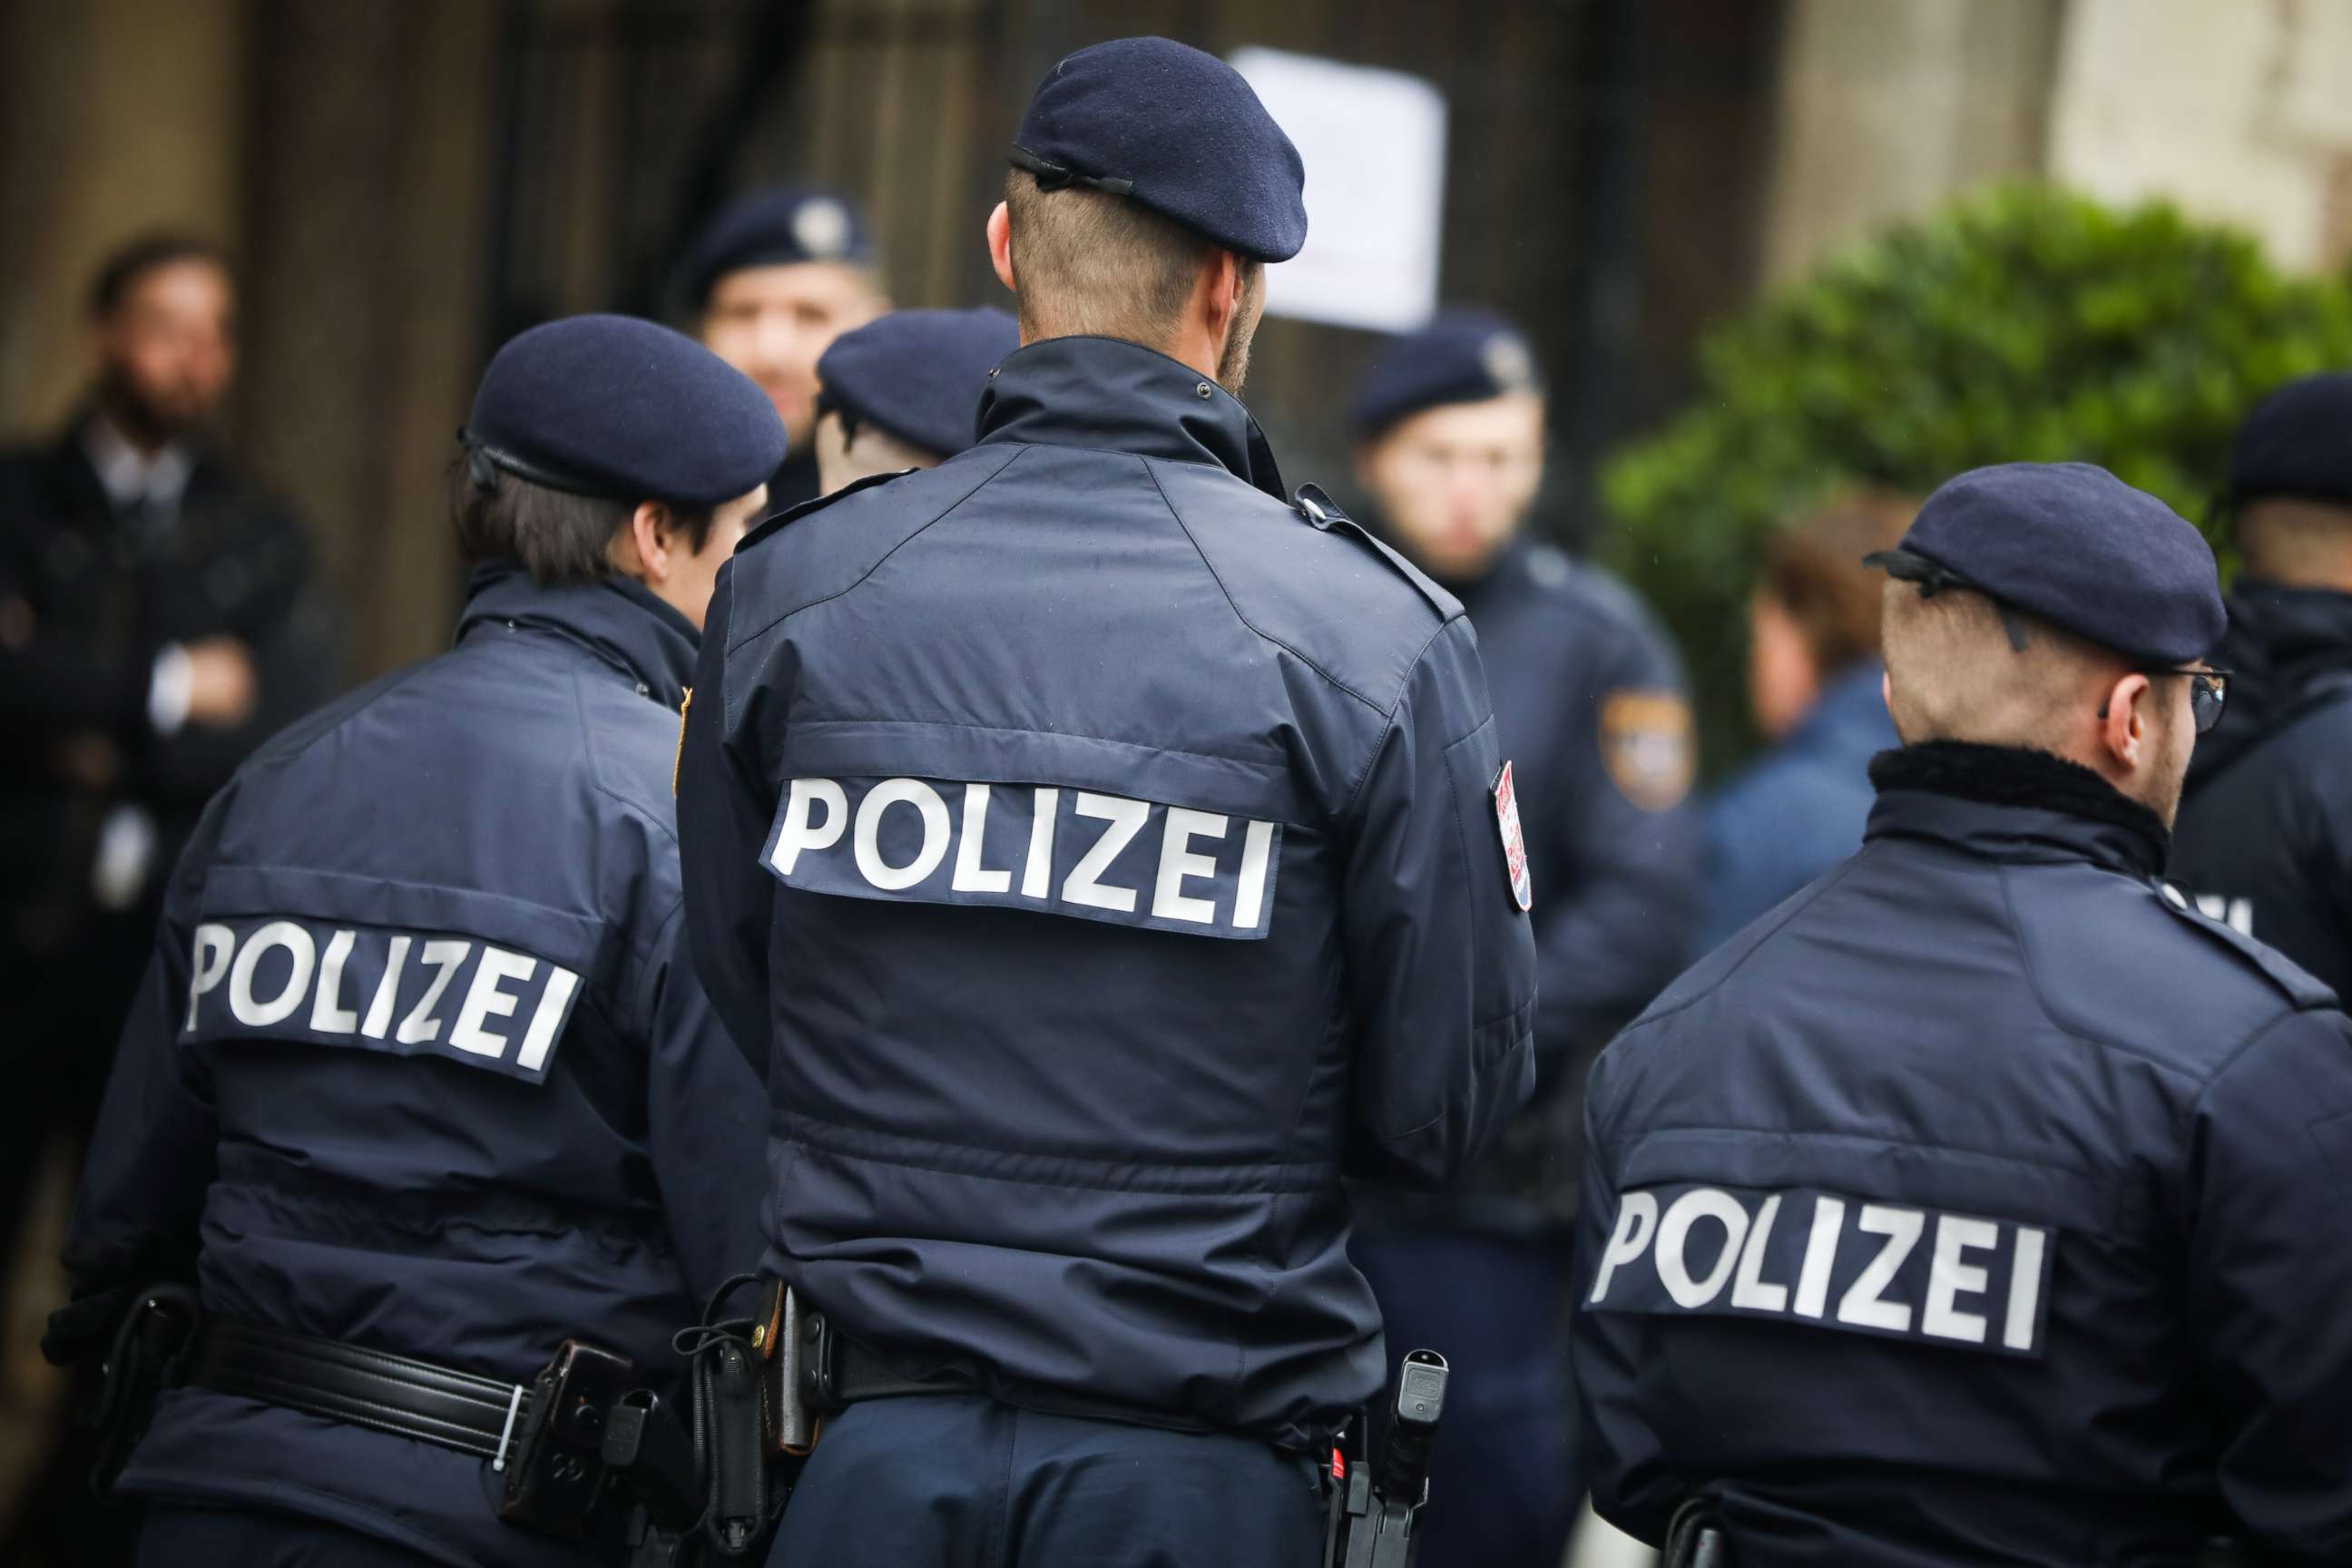 PHOTO: Police in Vienna, Austria on 29 May 2019.